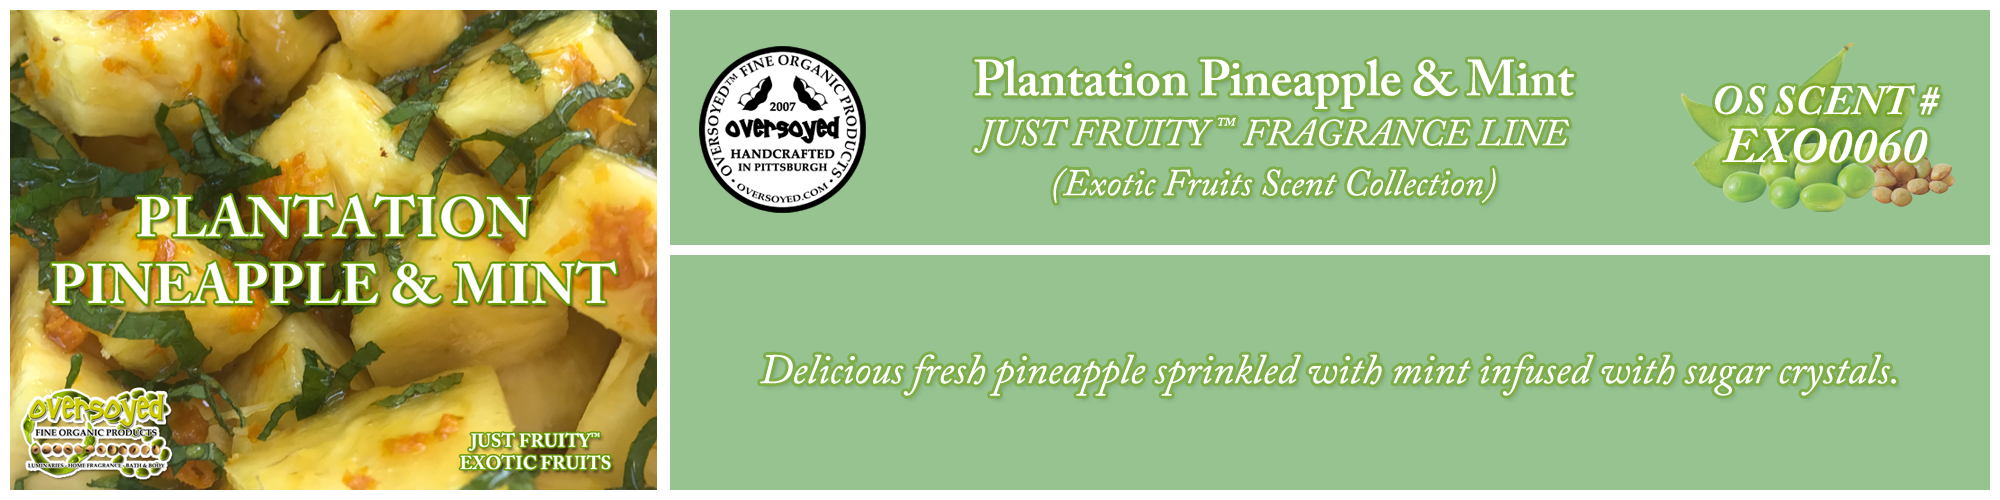 Plantation Pineapple & Mint Handcrafted Products Collection